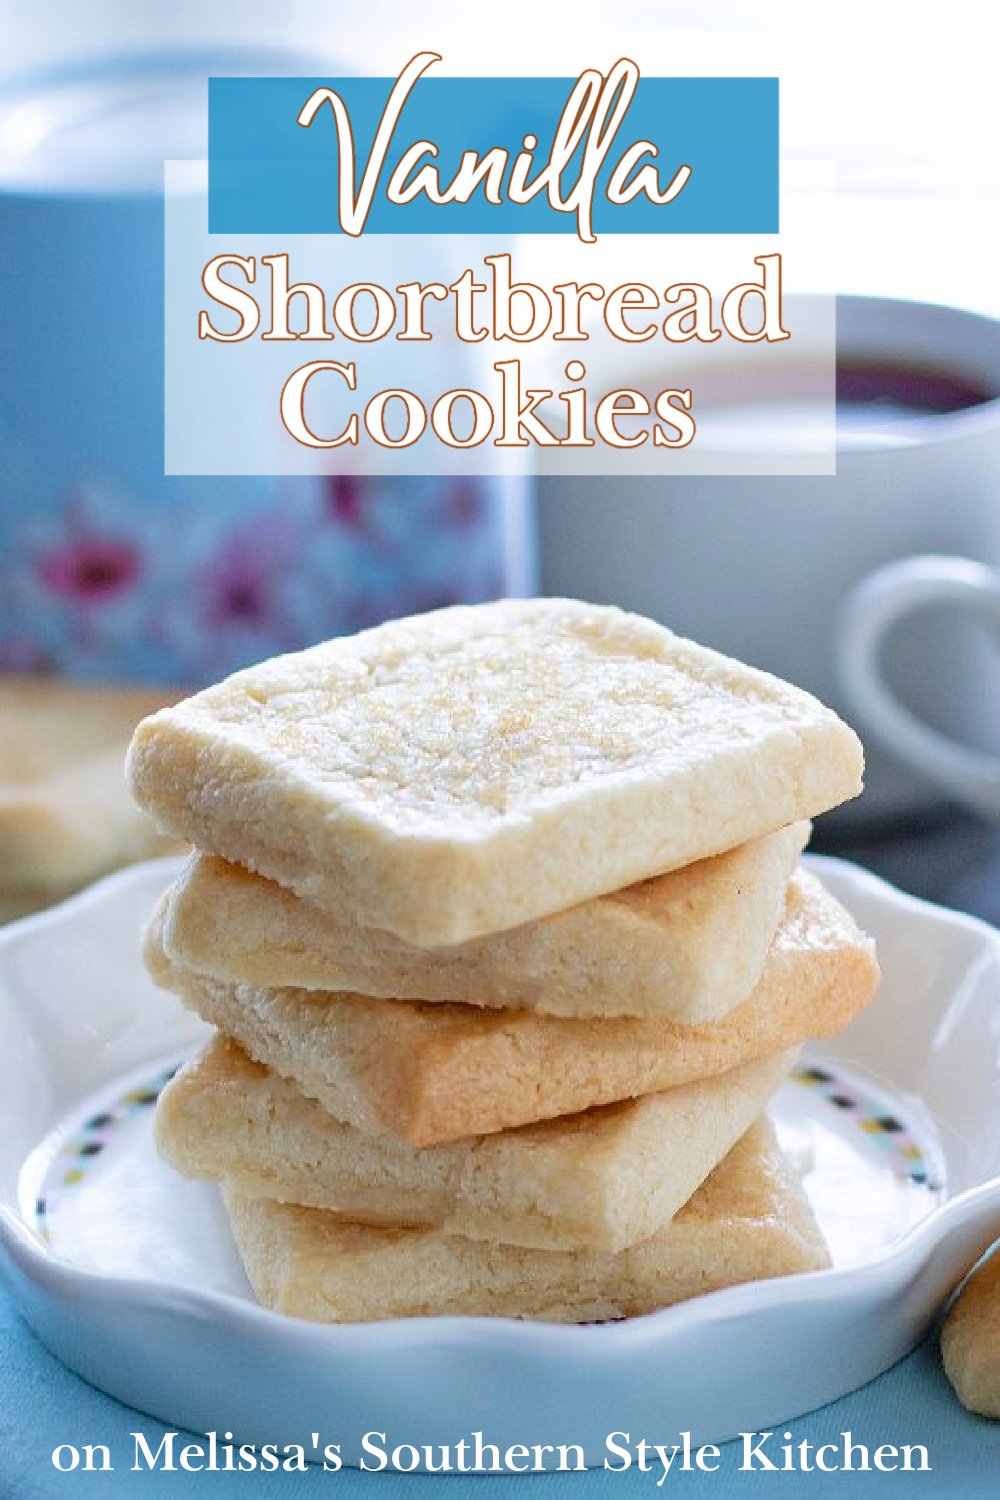 These buttery Vanilla Shortbread Cookies make the ideal sidekick for a cup of hot tea or coffee #vanillashortbread #shortbreadcookies #scottishshortbread #easyshortbreadrecipes #sugarcookies #shortbread #desserts #dessertfoodrecipes #southernfood #southernrecipes #holidaybaking #teatime